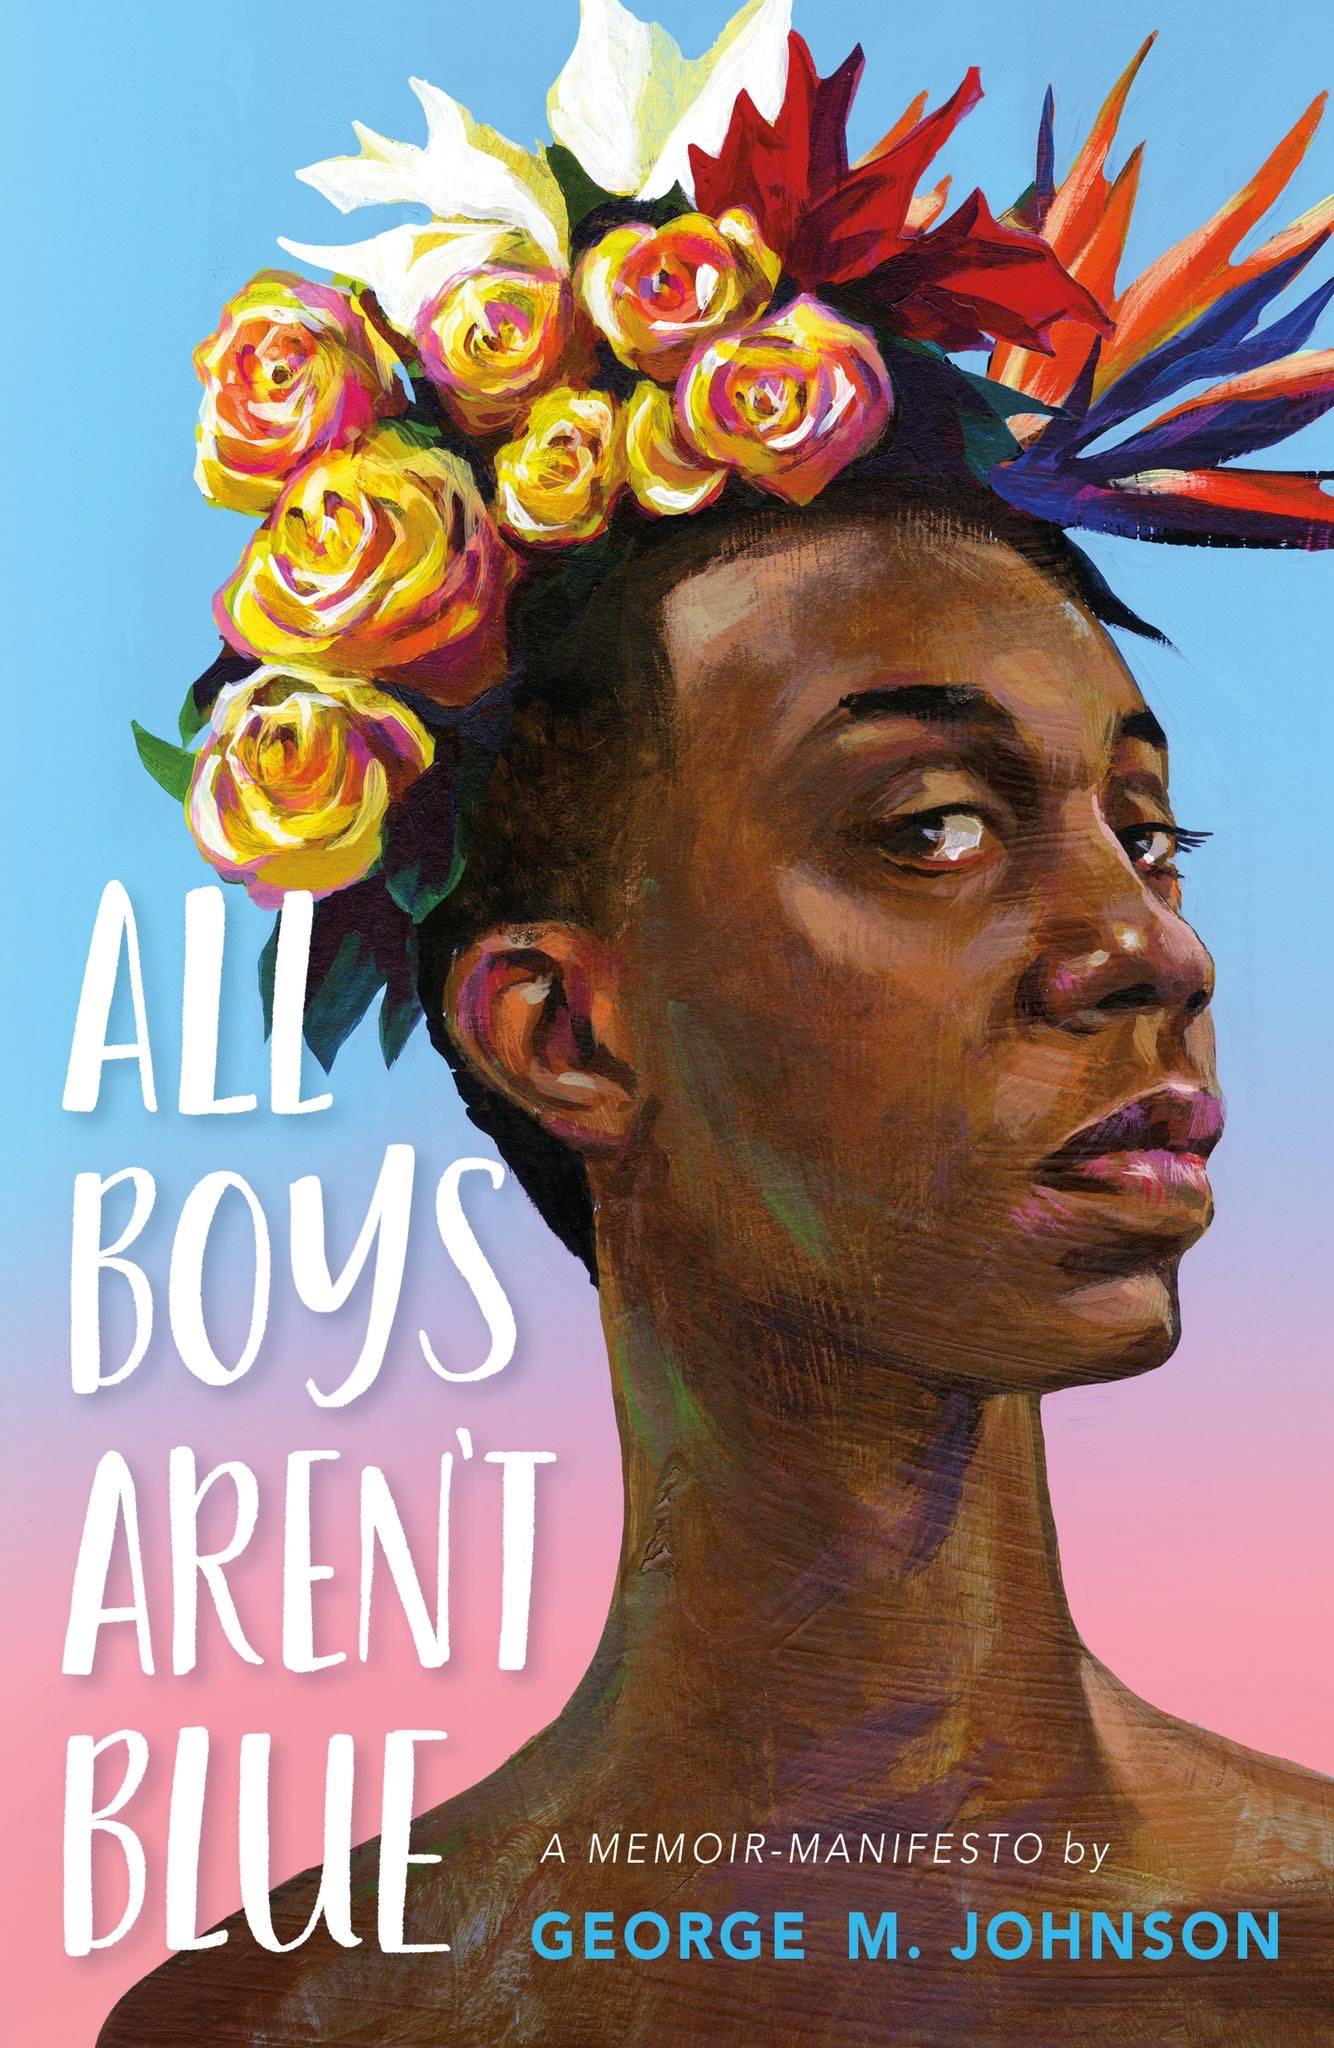 "All Boys Aren't Blue" by George M. Johnson